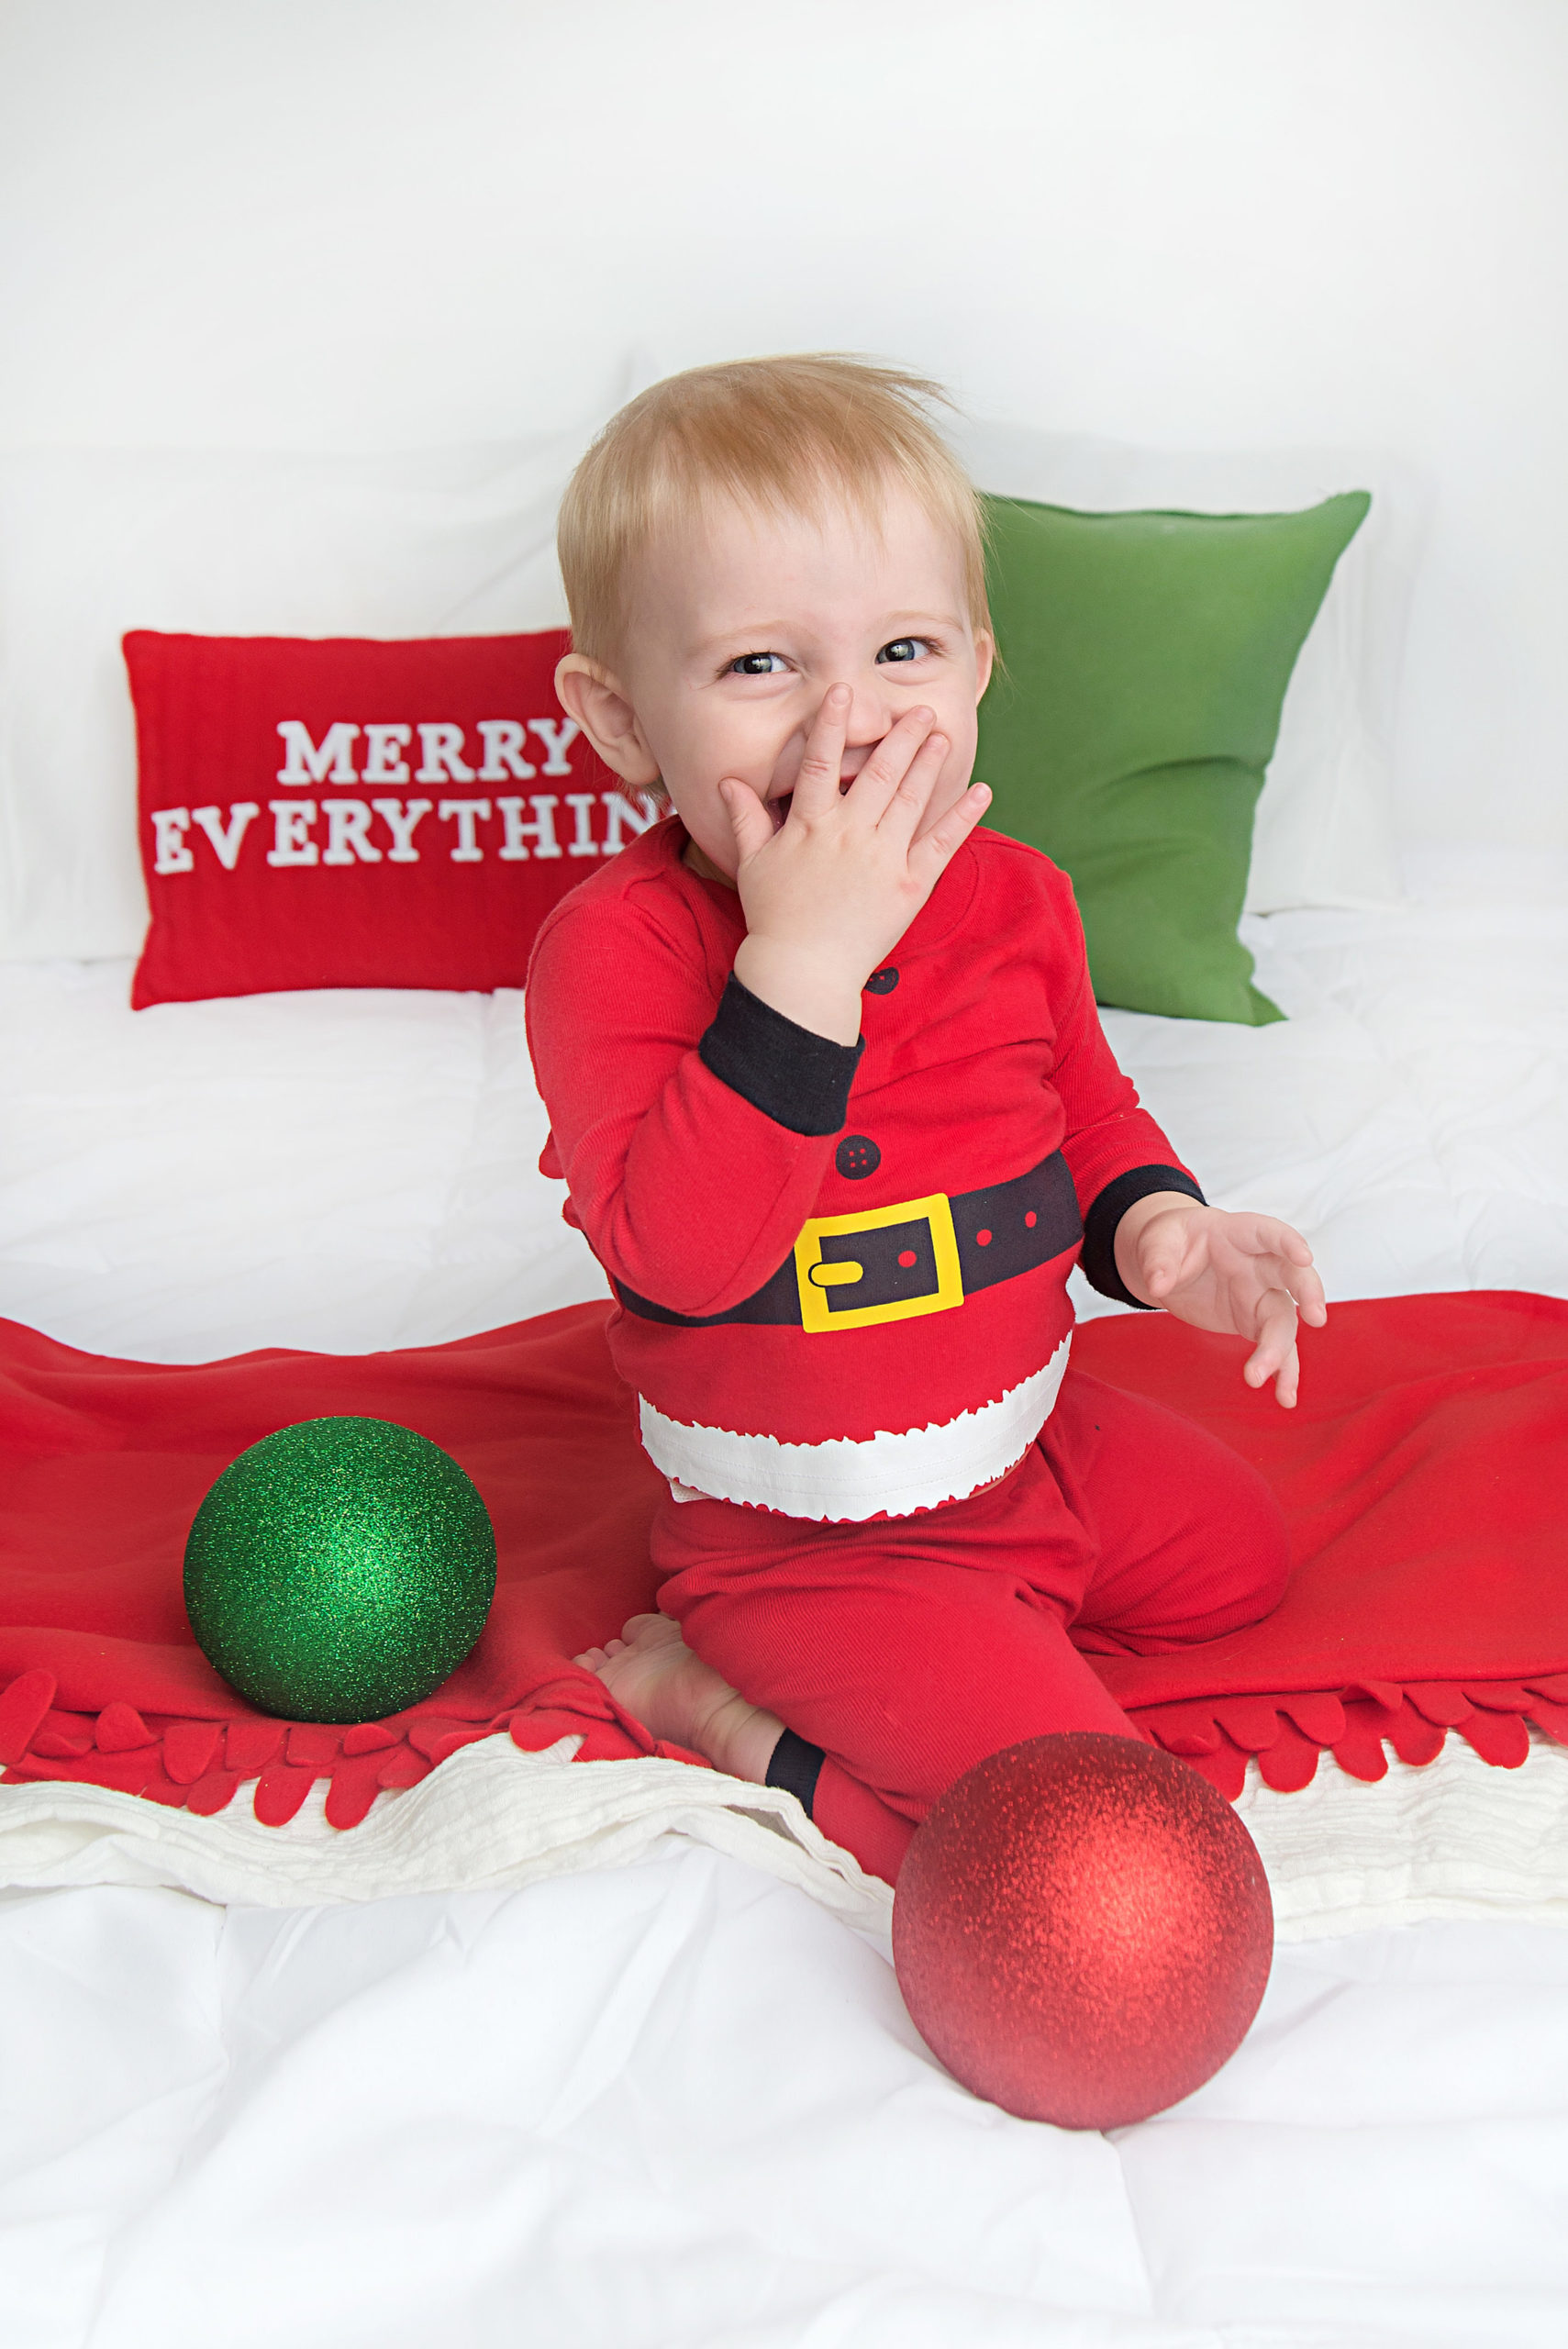 st-louis-photography-studio-christmas-picture-with-one-year-boy-in-santa-pjs.jpg